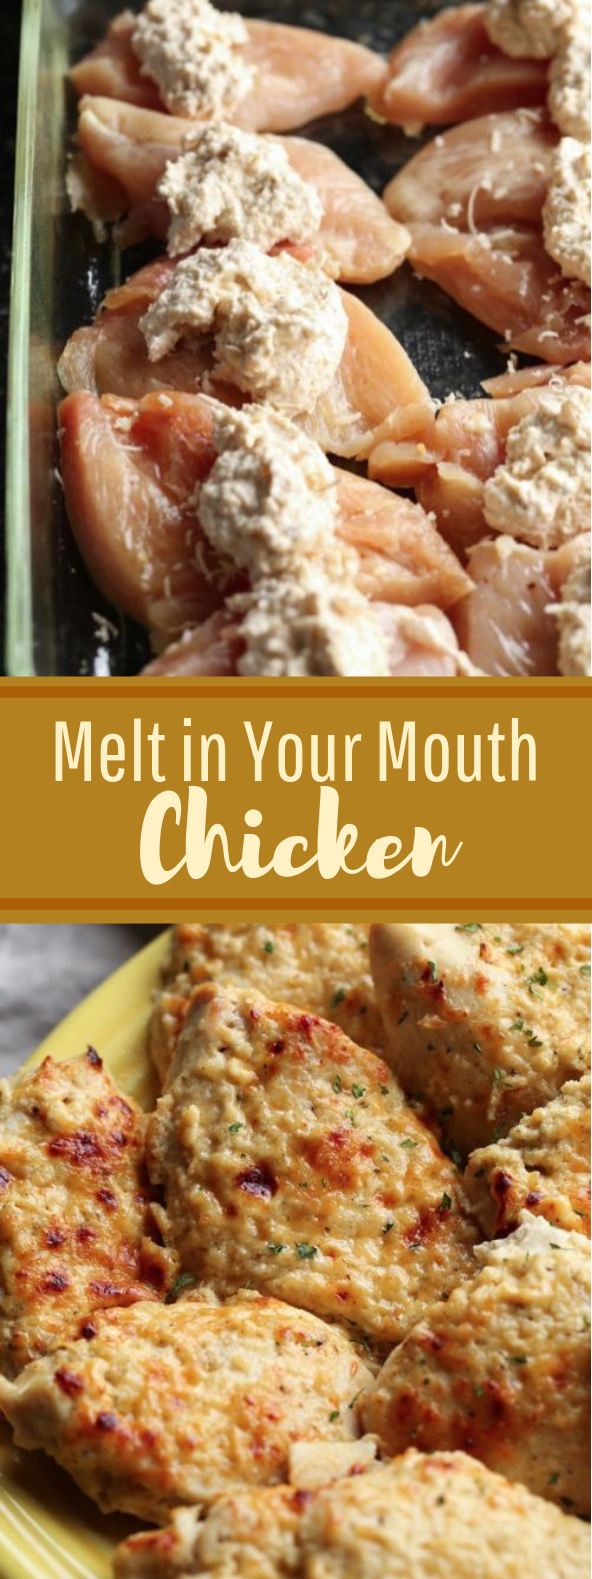 Melt in Your Mouth Chicken #dinner #comfortfood